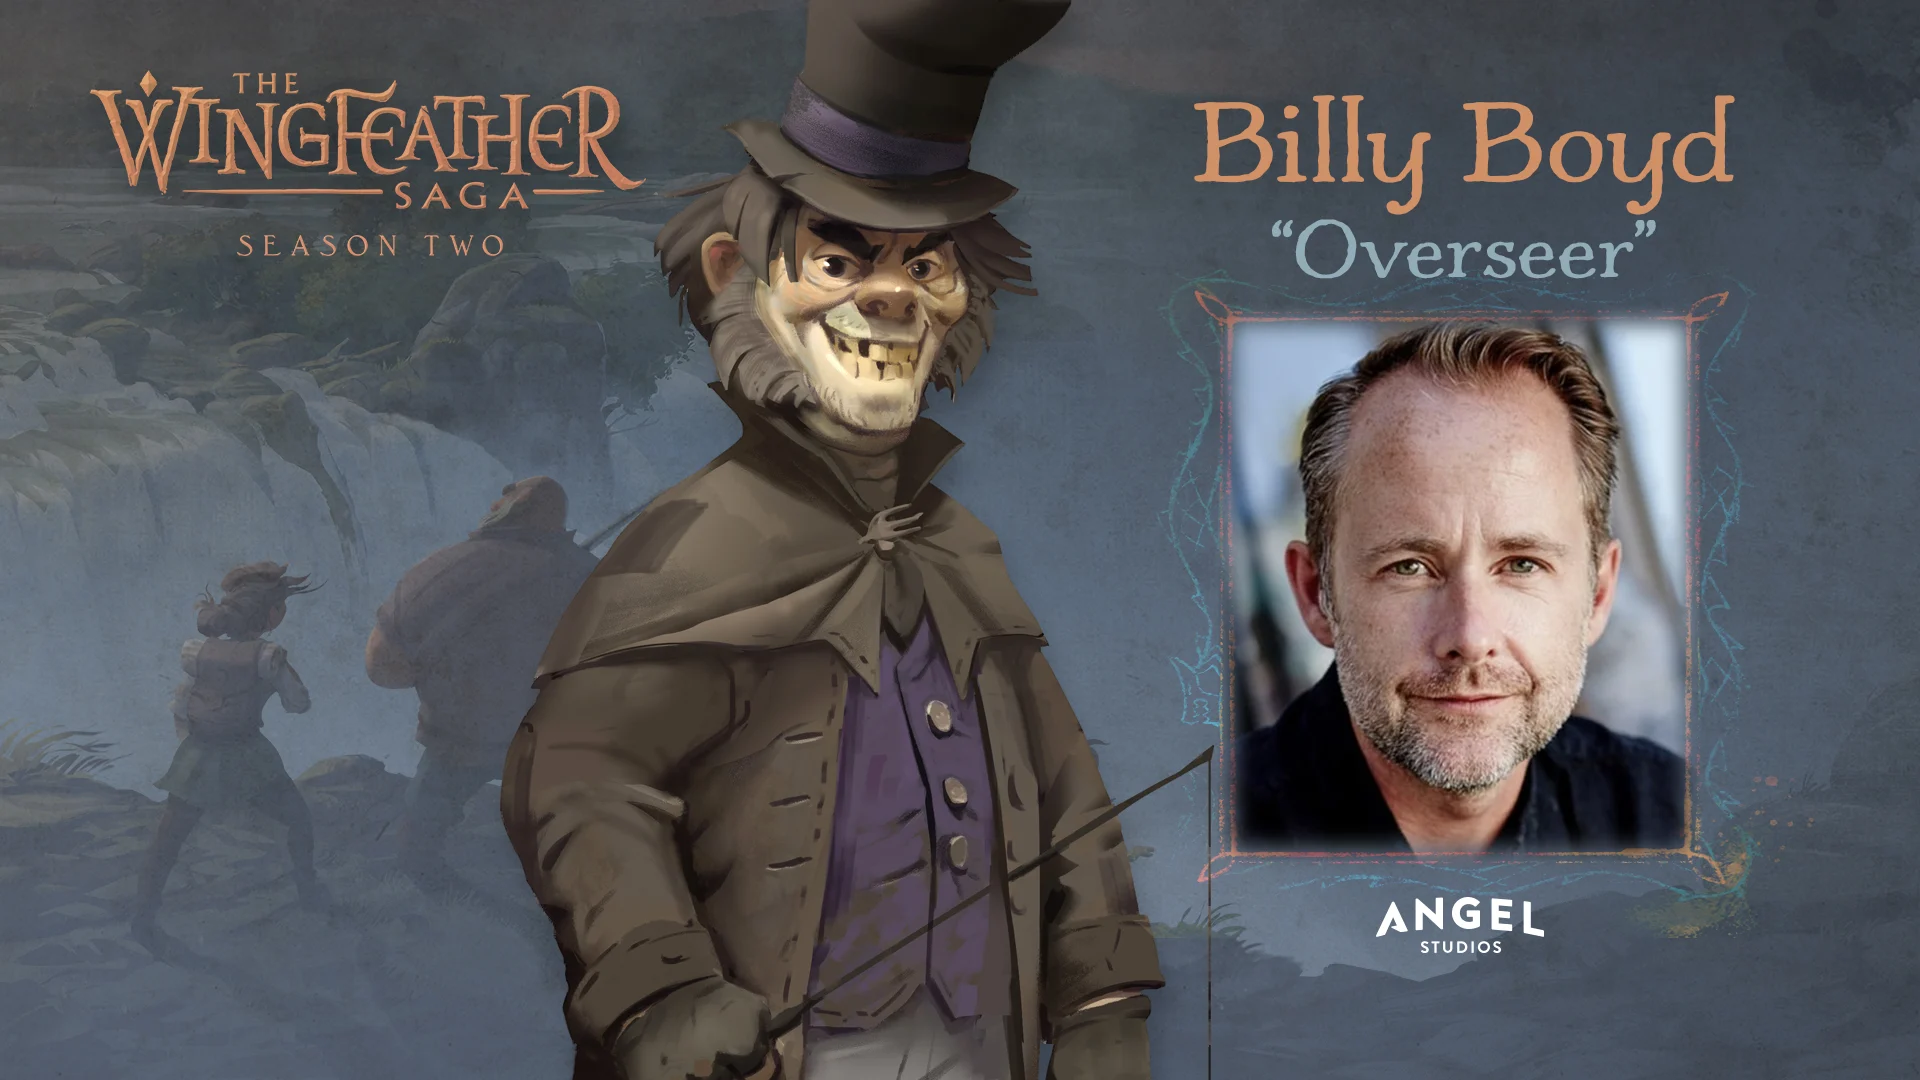 Image of Billy Boyd Character Announcement